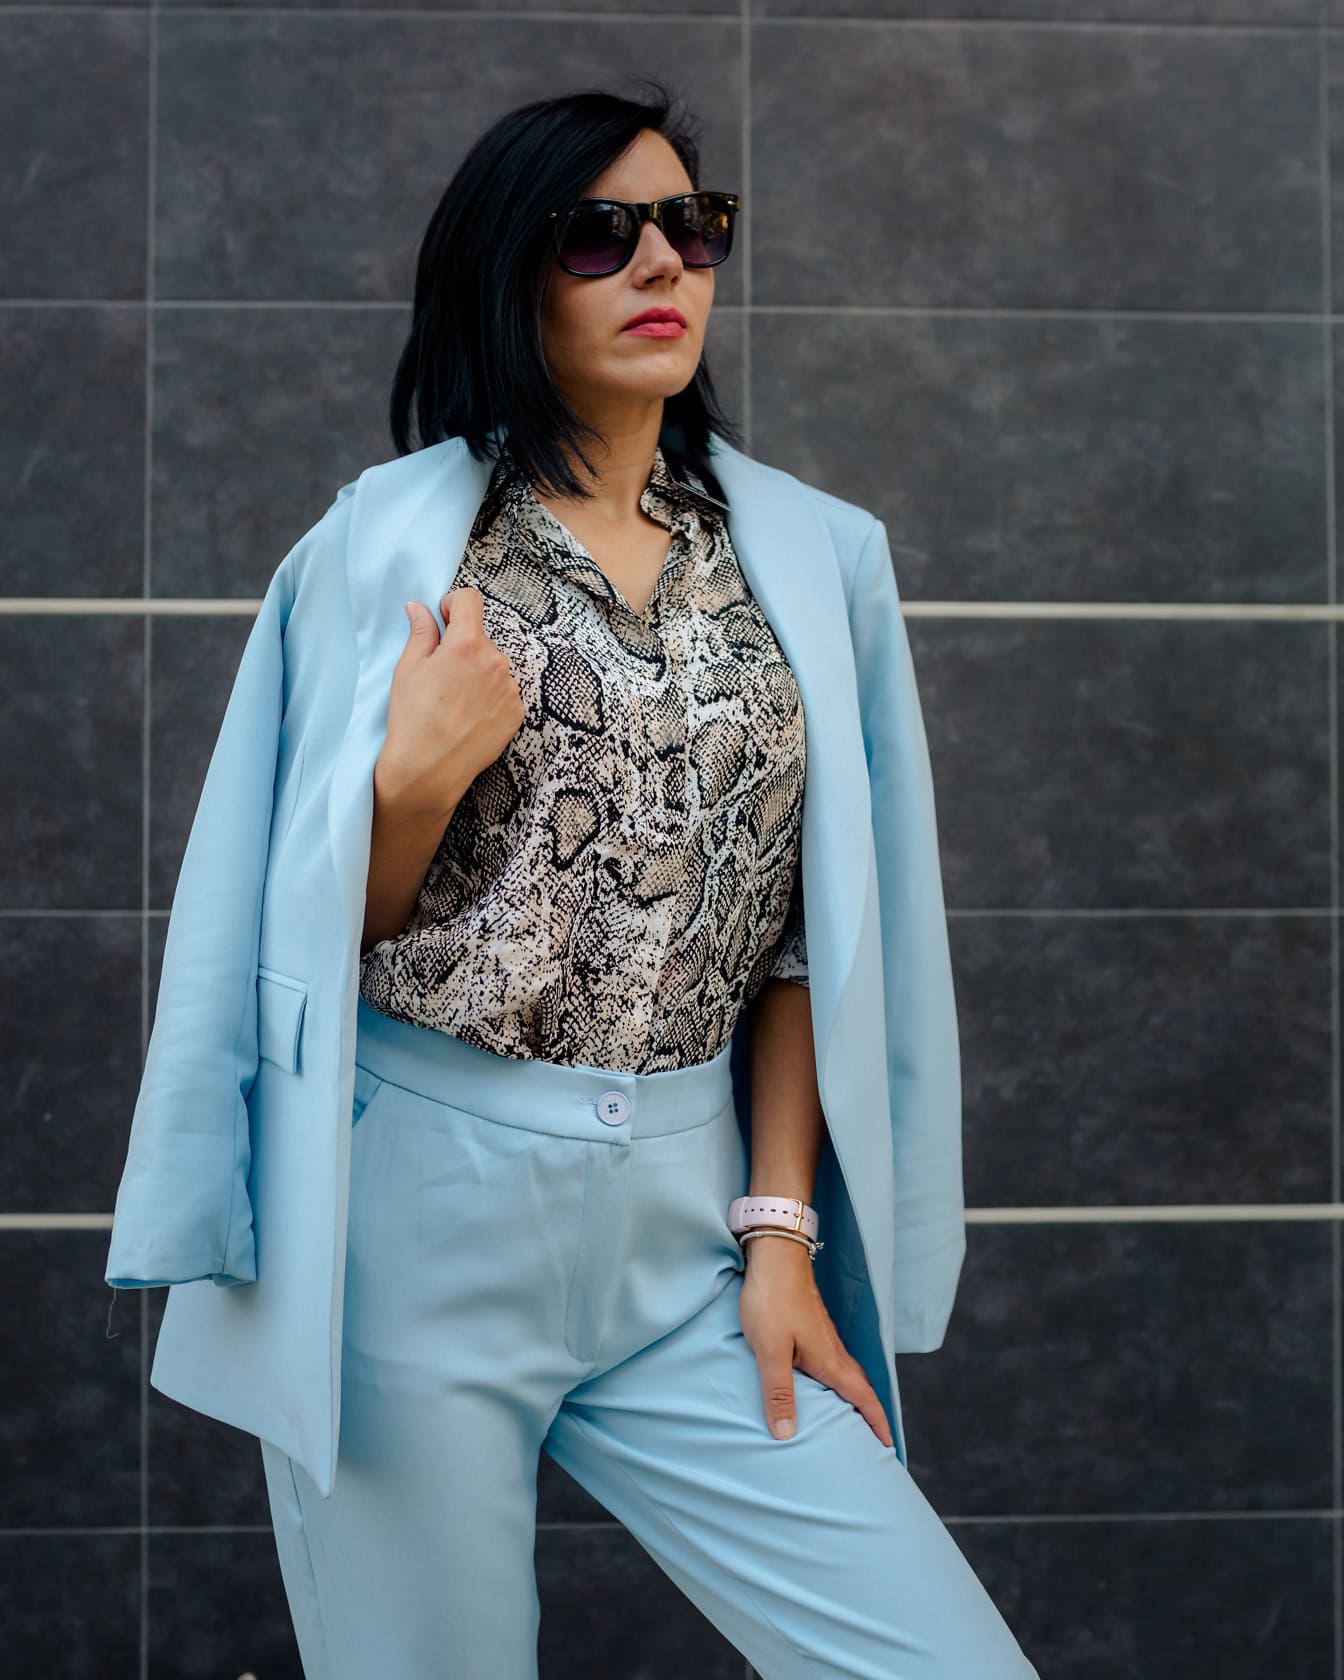 A businesswoman poses in sunglasses and elegant light blue pants and a coat and a shirt with a snakeskin pattern